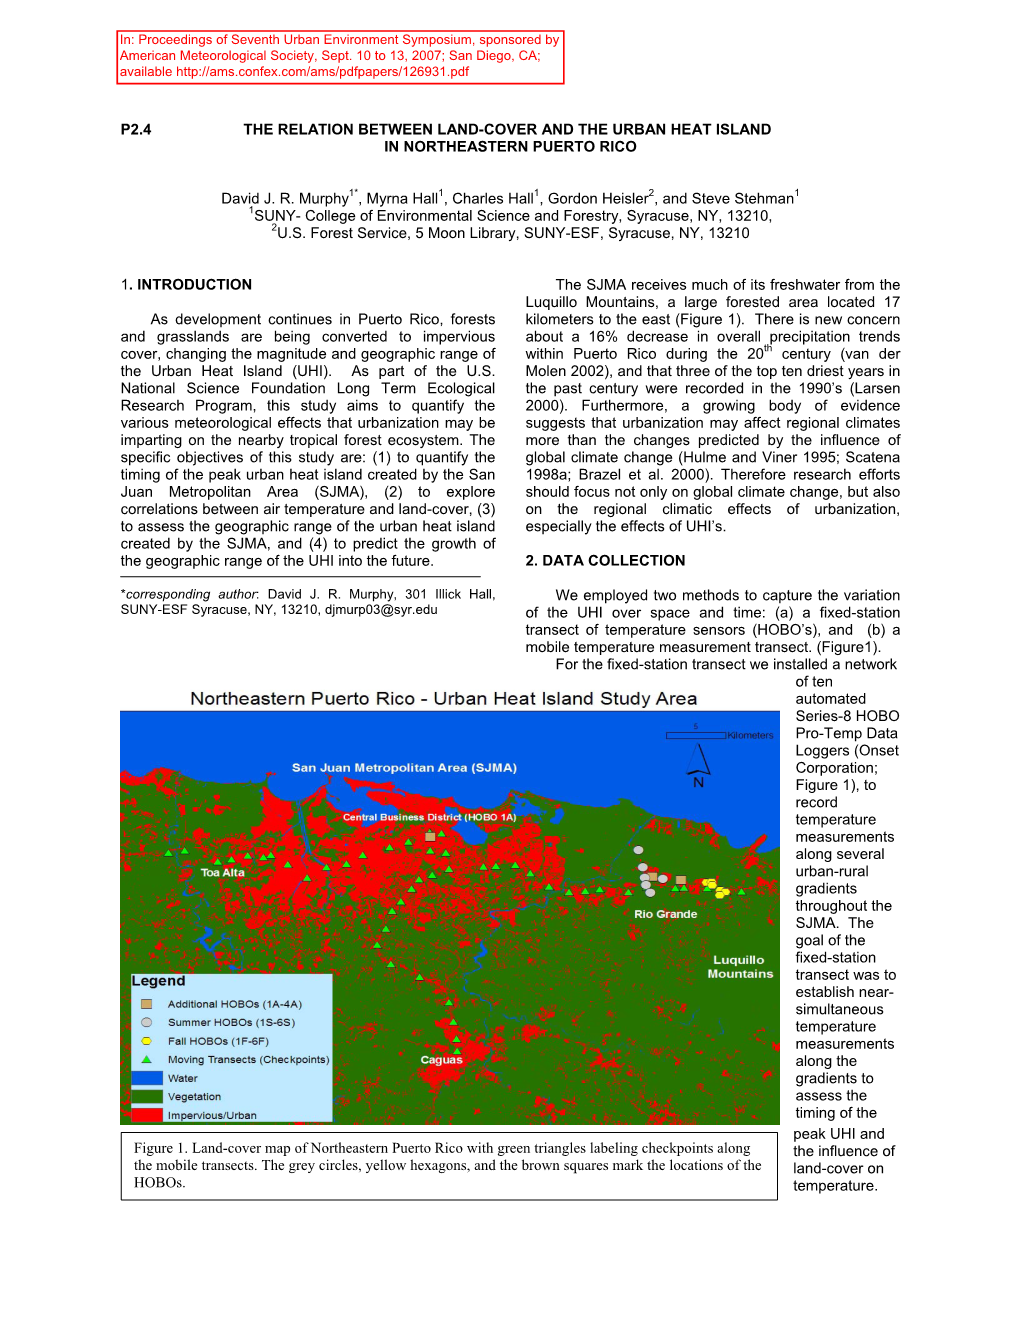 P2.4 the Relation Between Land-Cover and the Urban Heat Island in Northeastern Puerto Rico